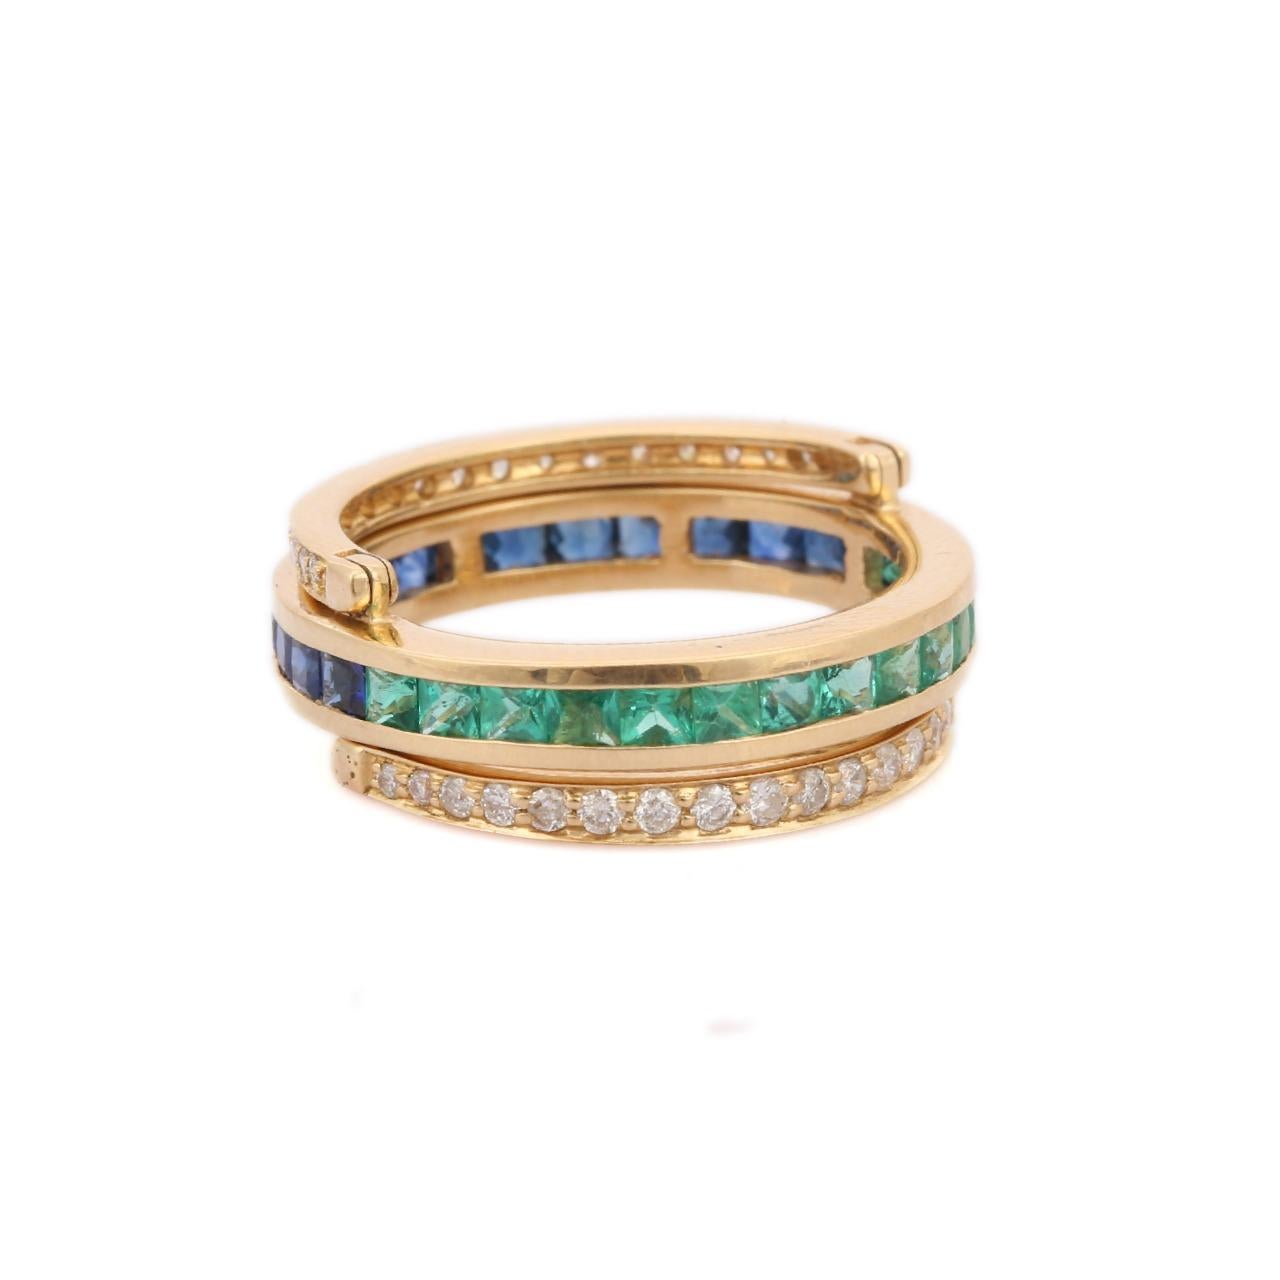 Mixed Cut 14K Yellow Gold Spinner Ring in Sapphire, Emerald and Diamond.